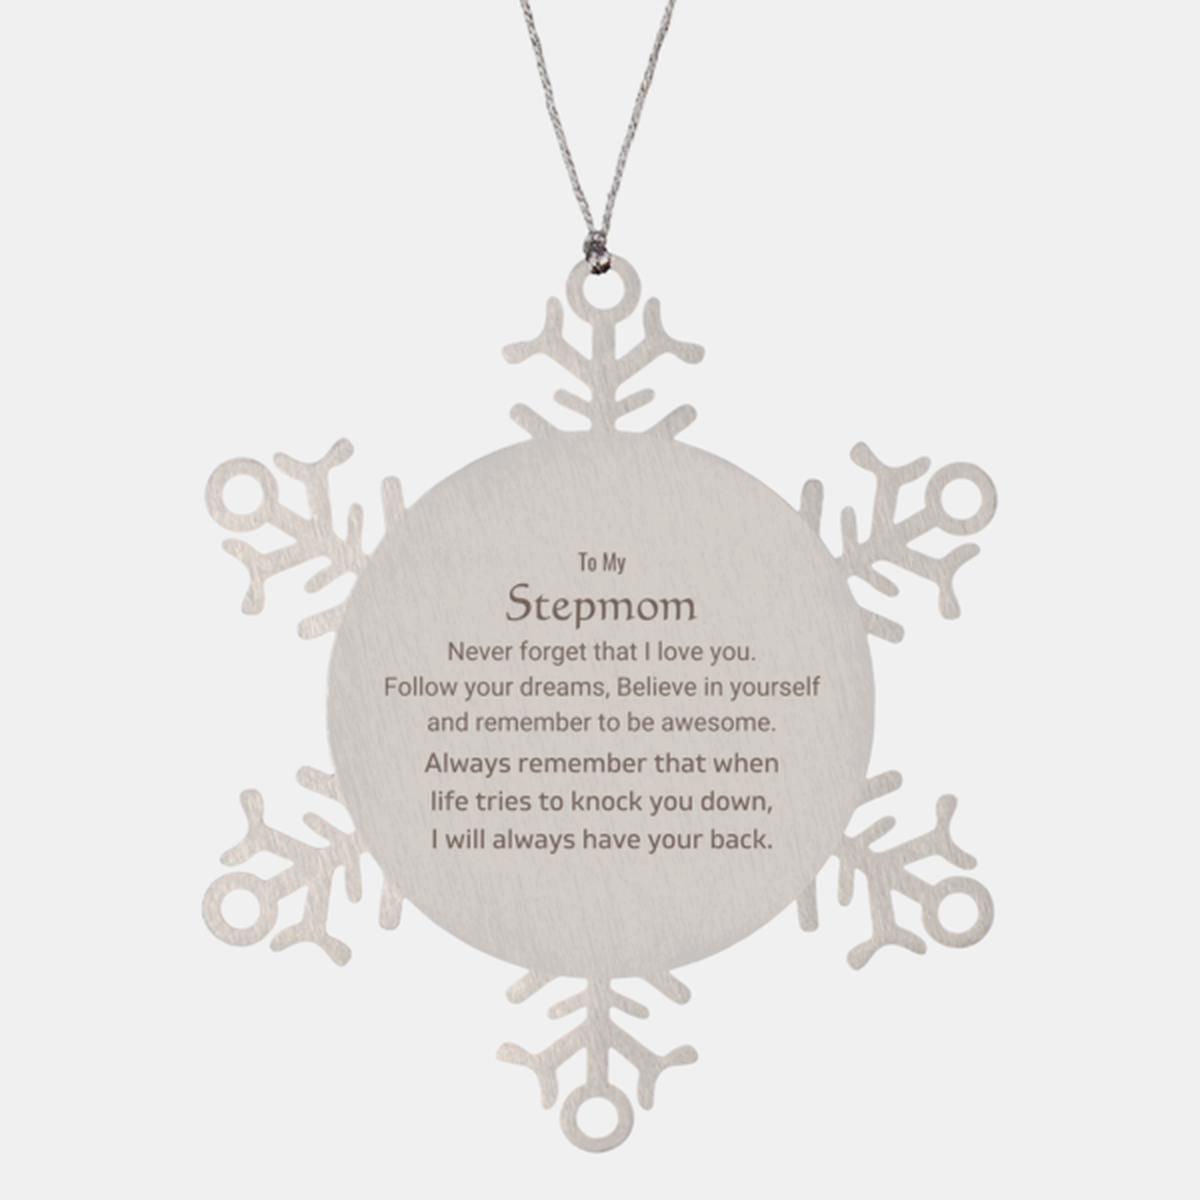 Inspirational Gifts for Stepmom, Follow your dreams, Believe in yourself, Stepmom Snowflake Ornament, Birthday Christmas Unique Gifts For Stepmom